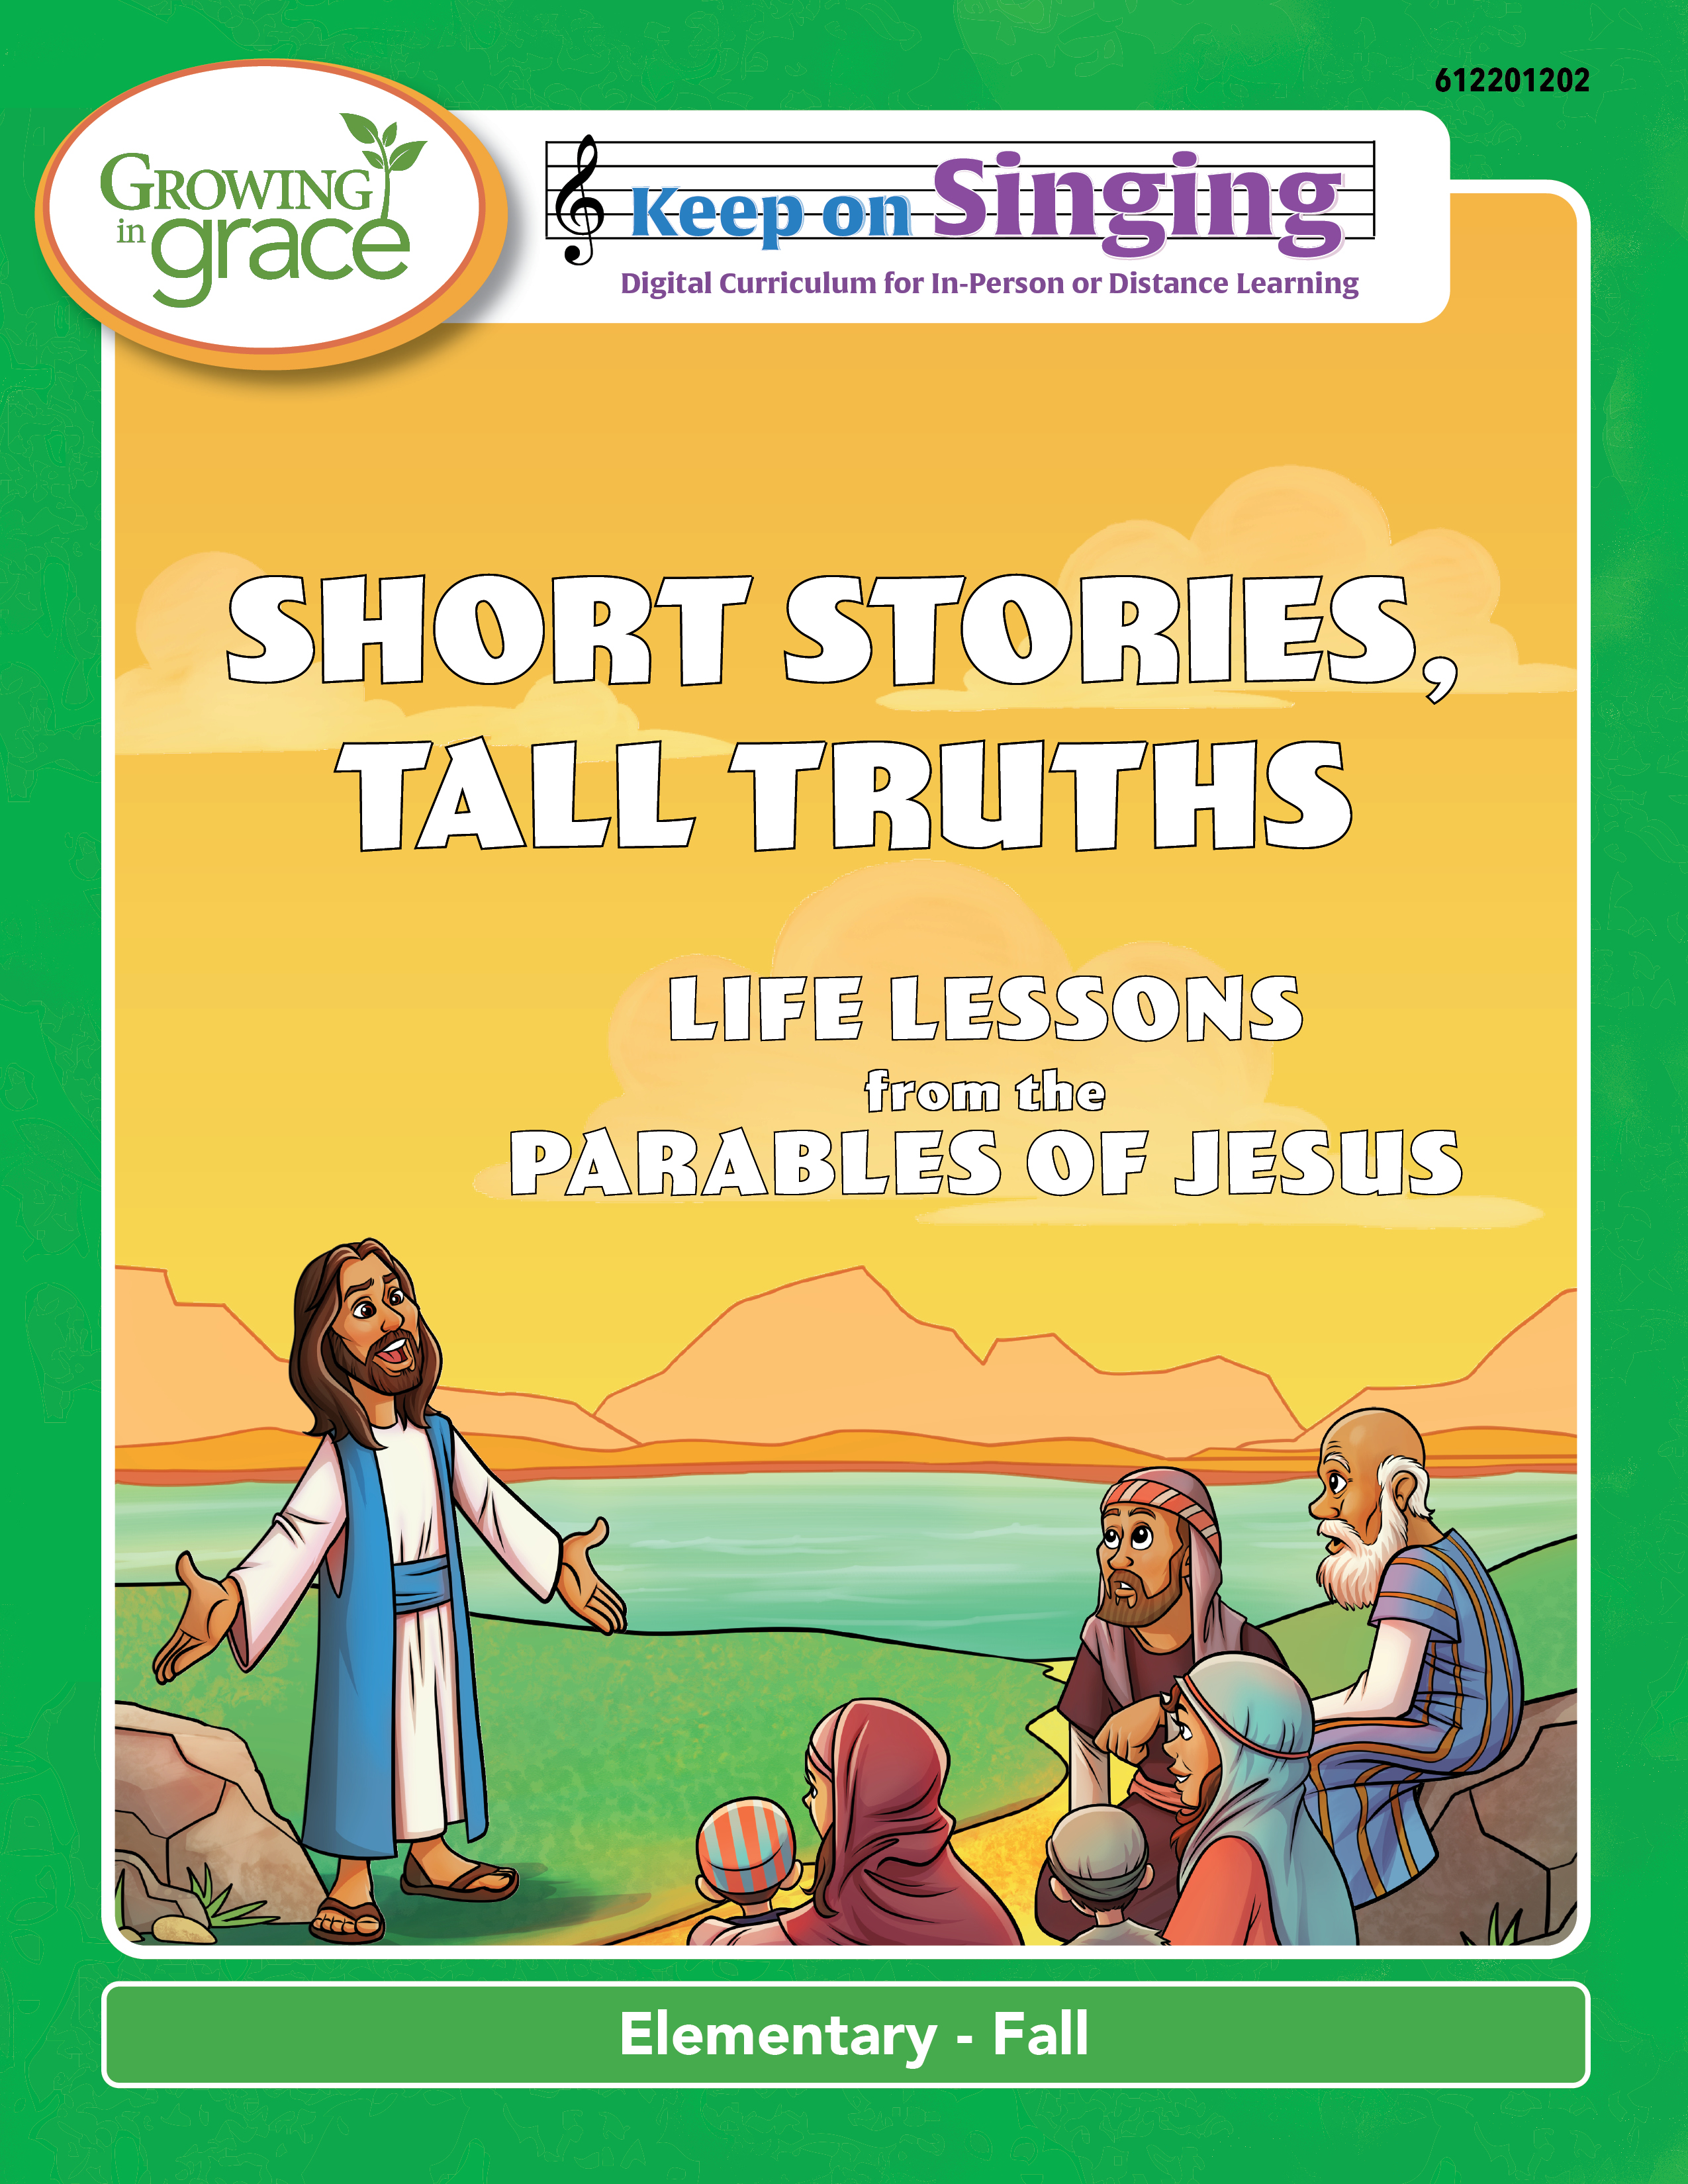 Keep on Singing: Short Stories, Tall Truths - Elementary (Fall) 